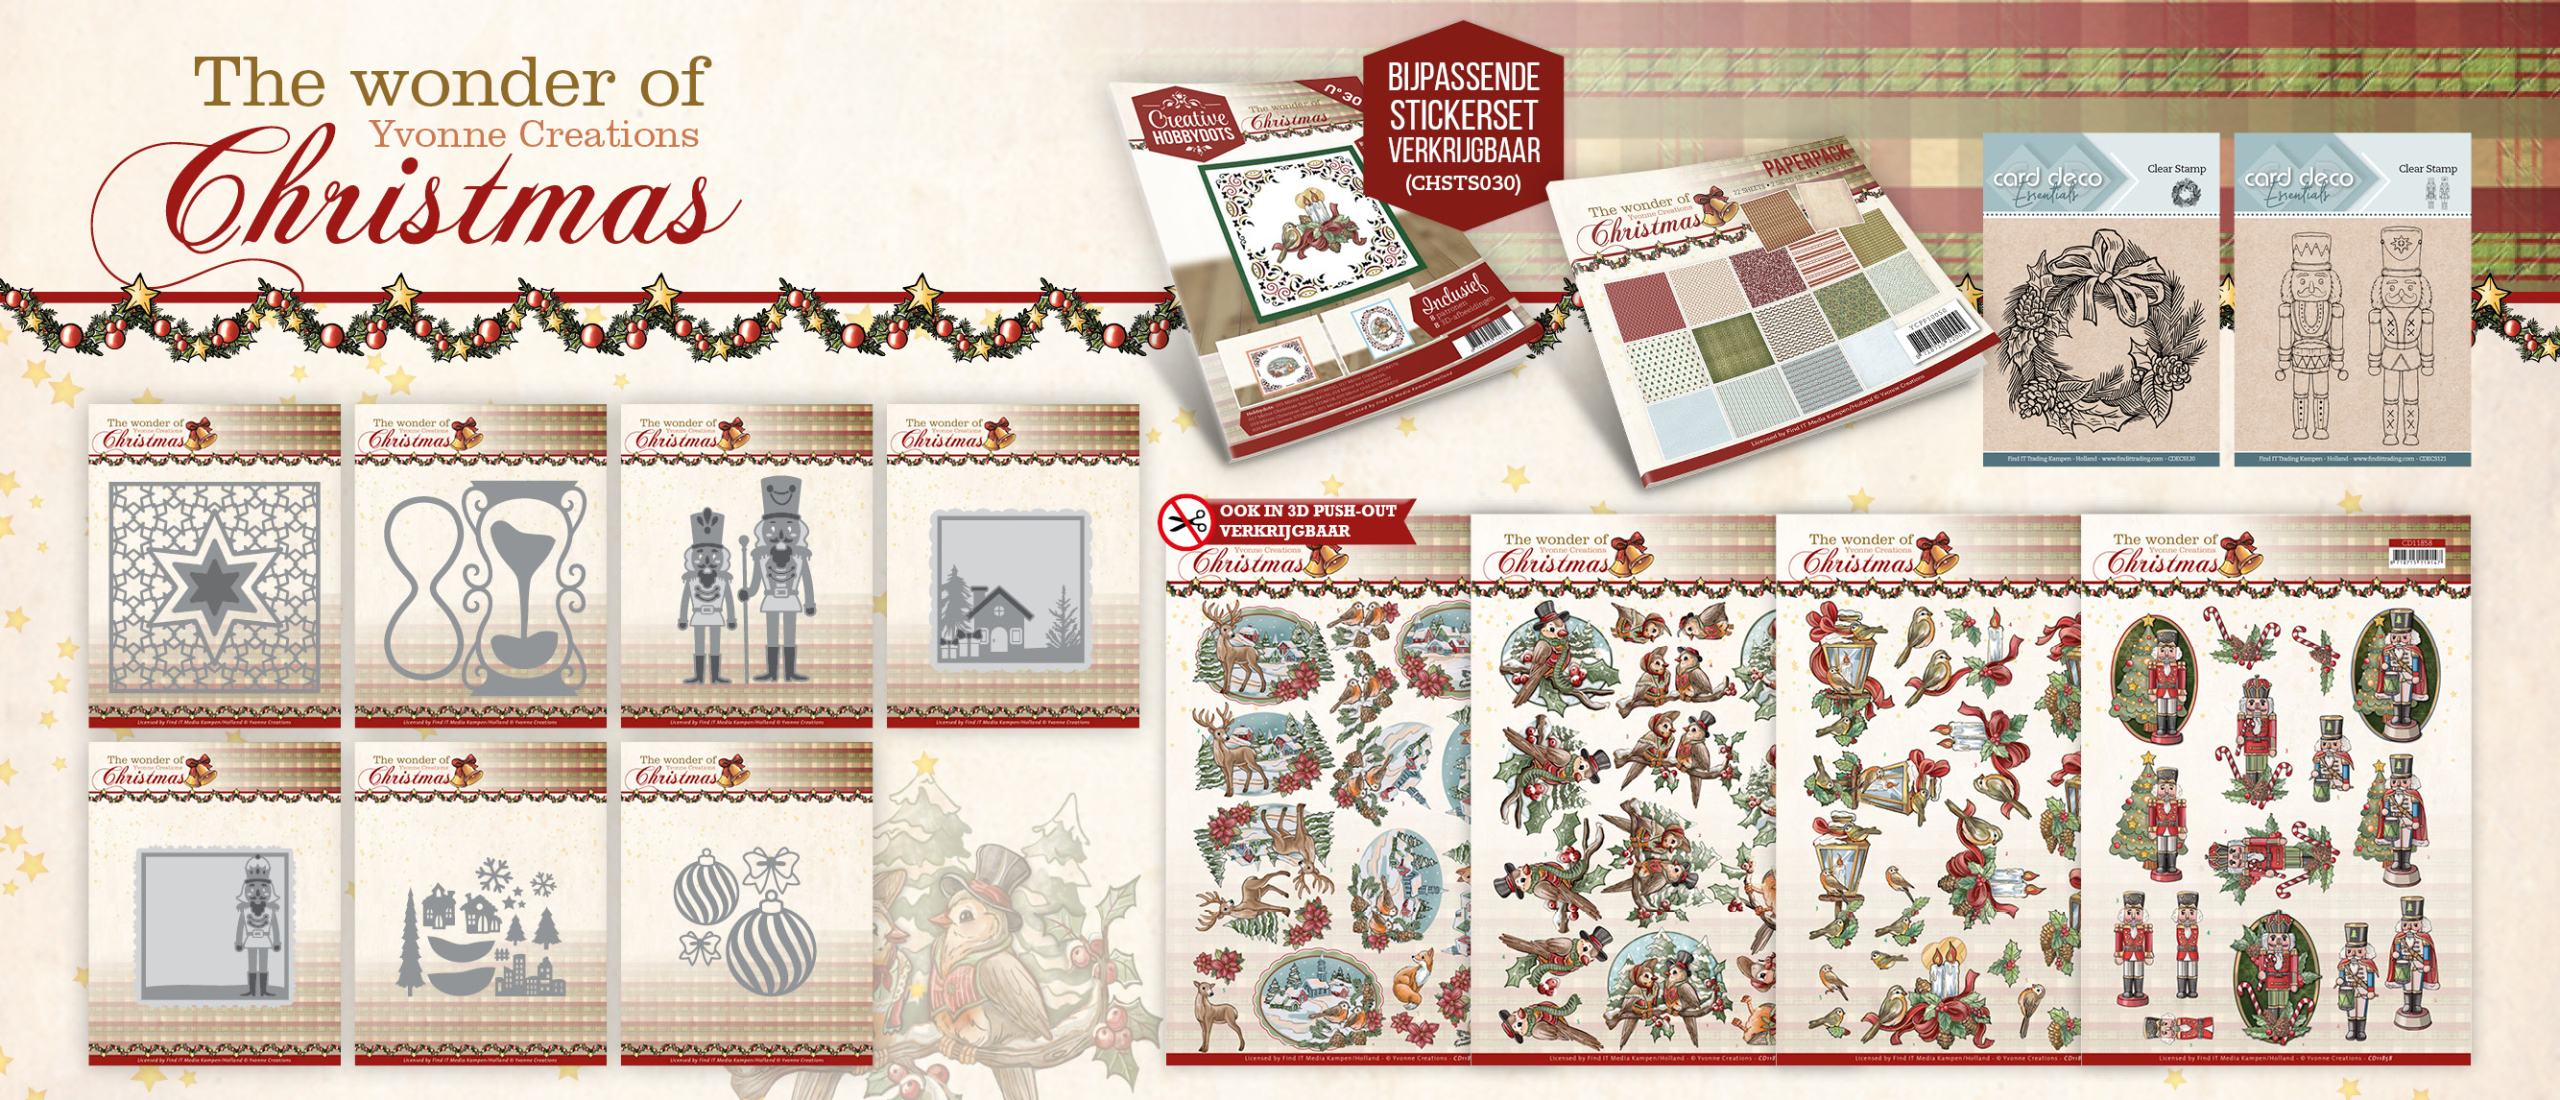 Nieuwe collectie The Wonder of Christmas  - Yvonne Creations!